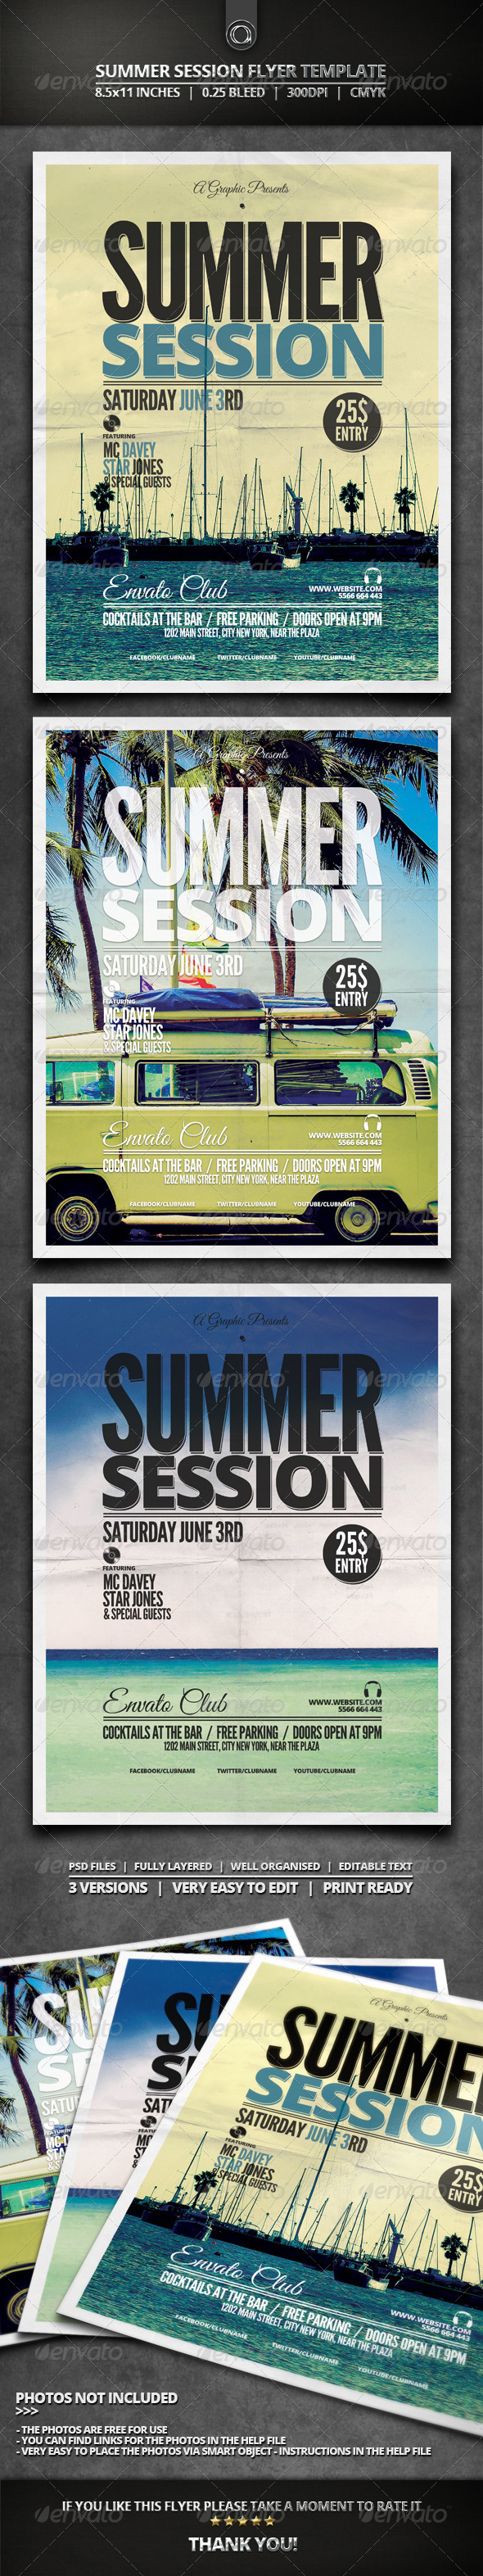 Summer Session Flyer Template